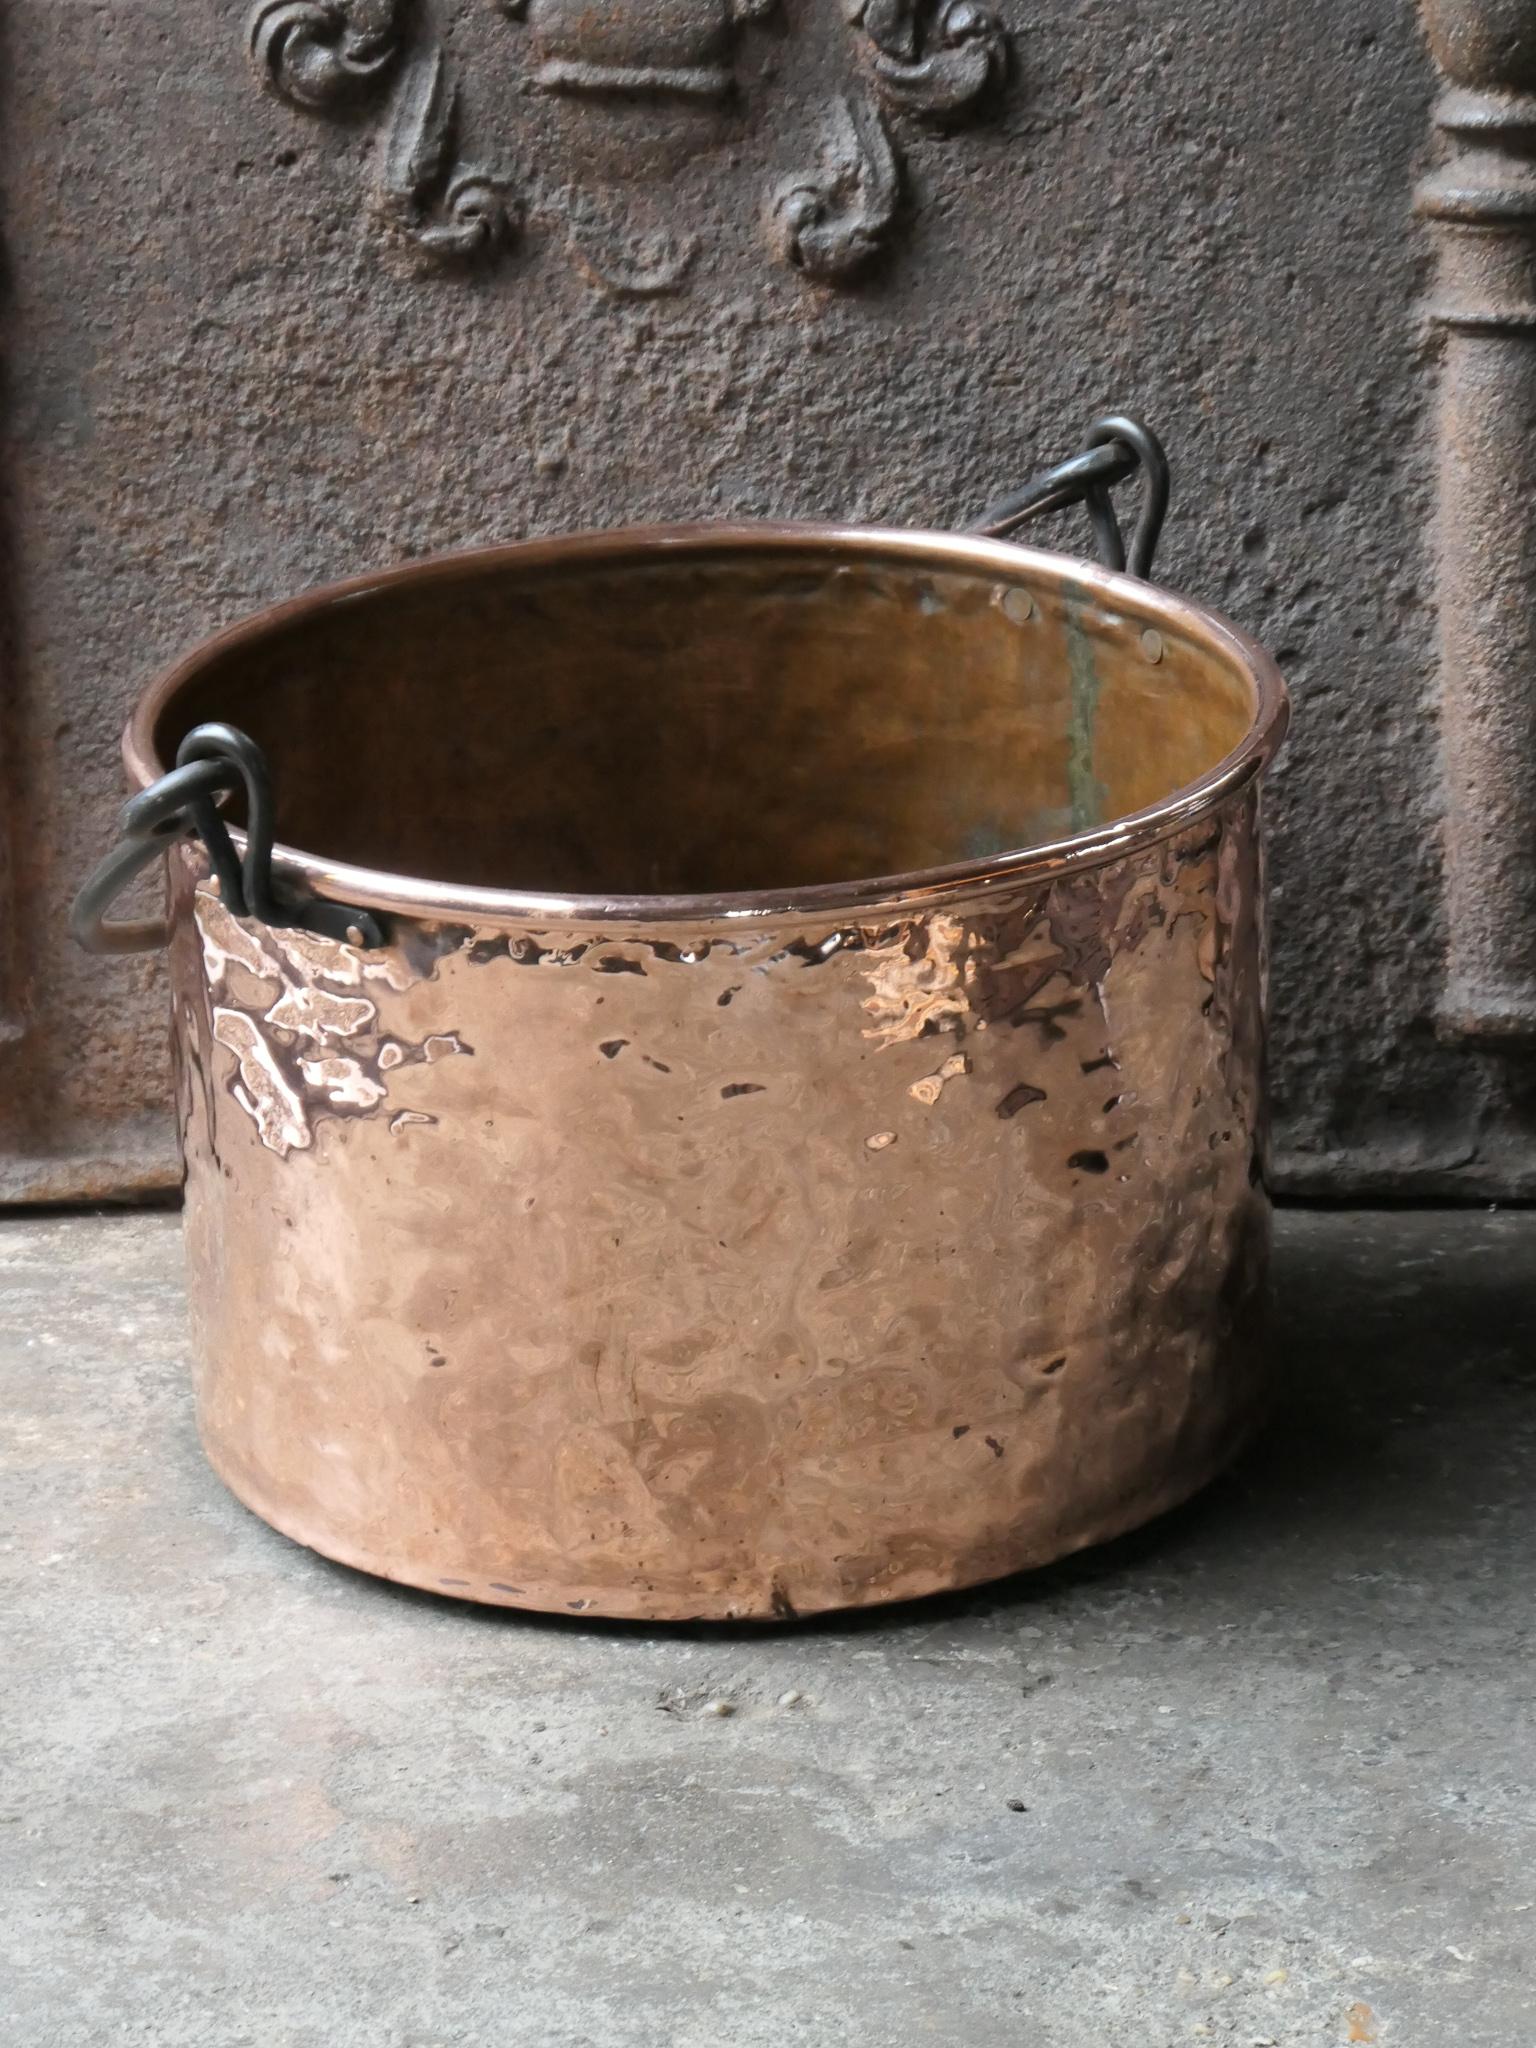 Forged Antique Dutch Polished Copper Log Holder, 18th-19th Century